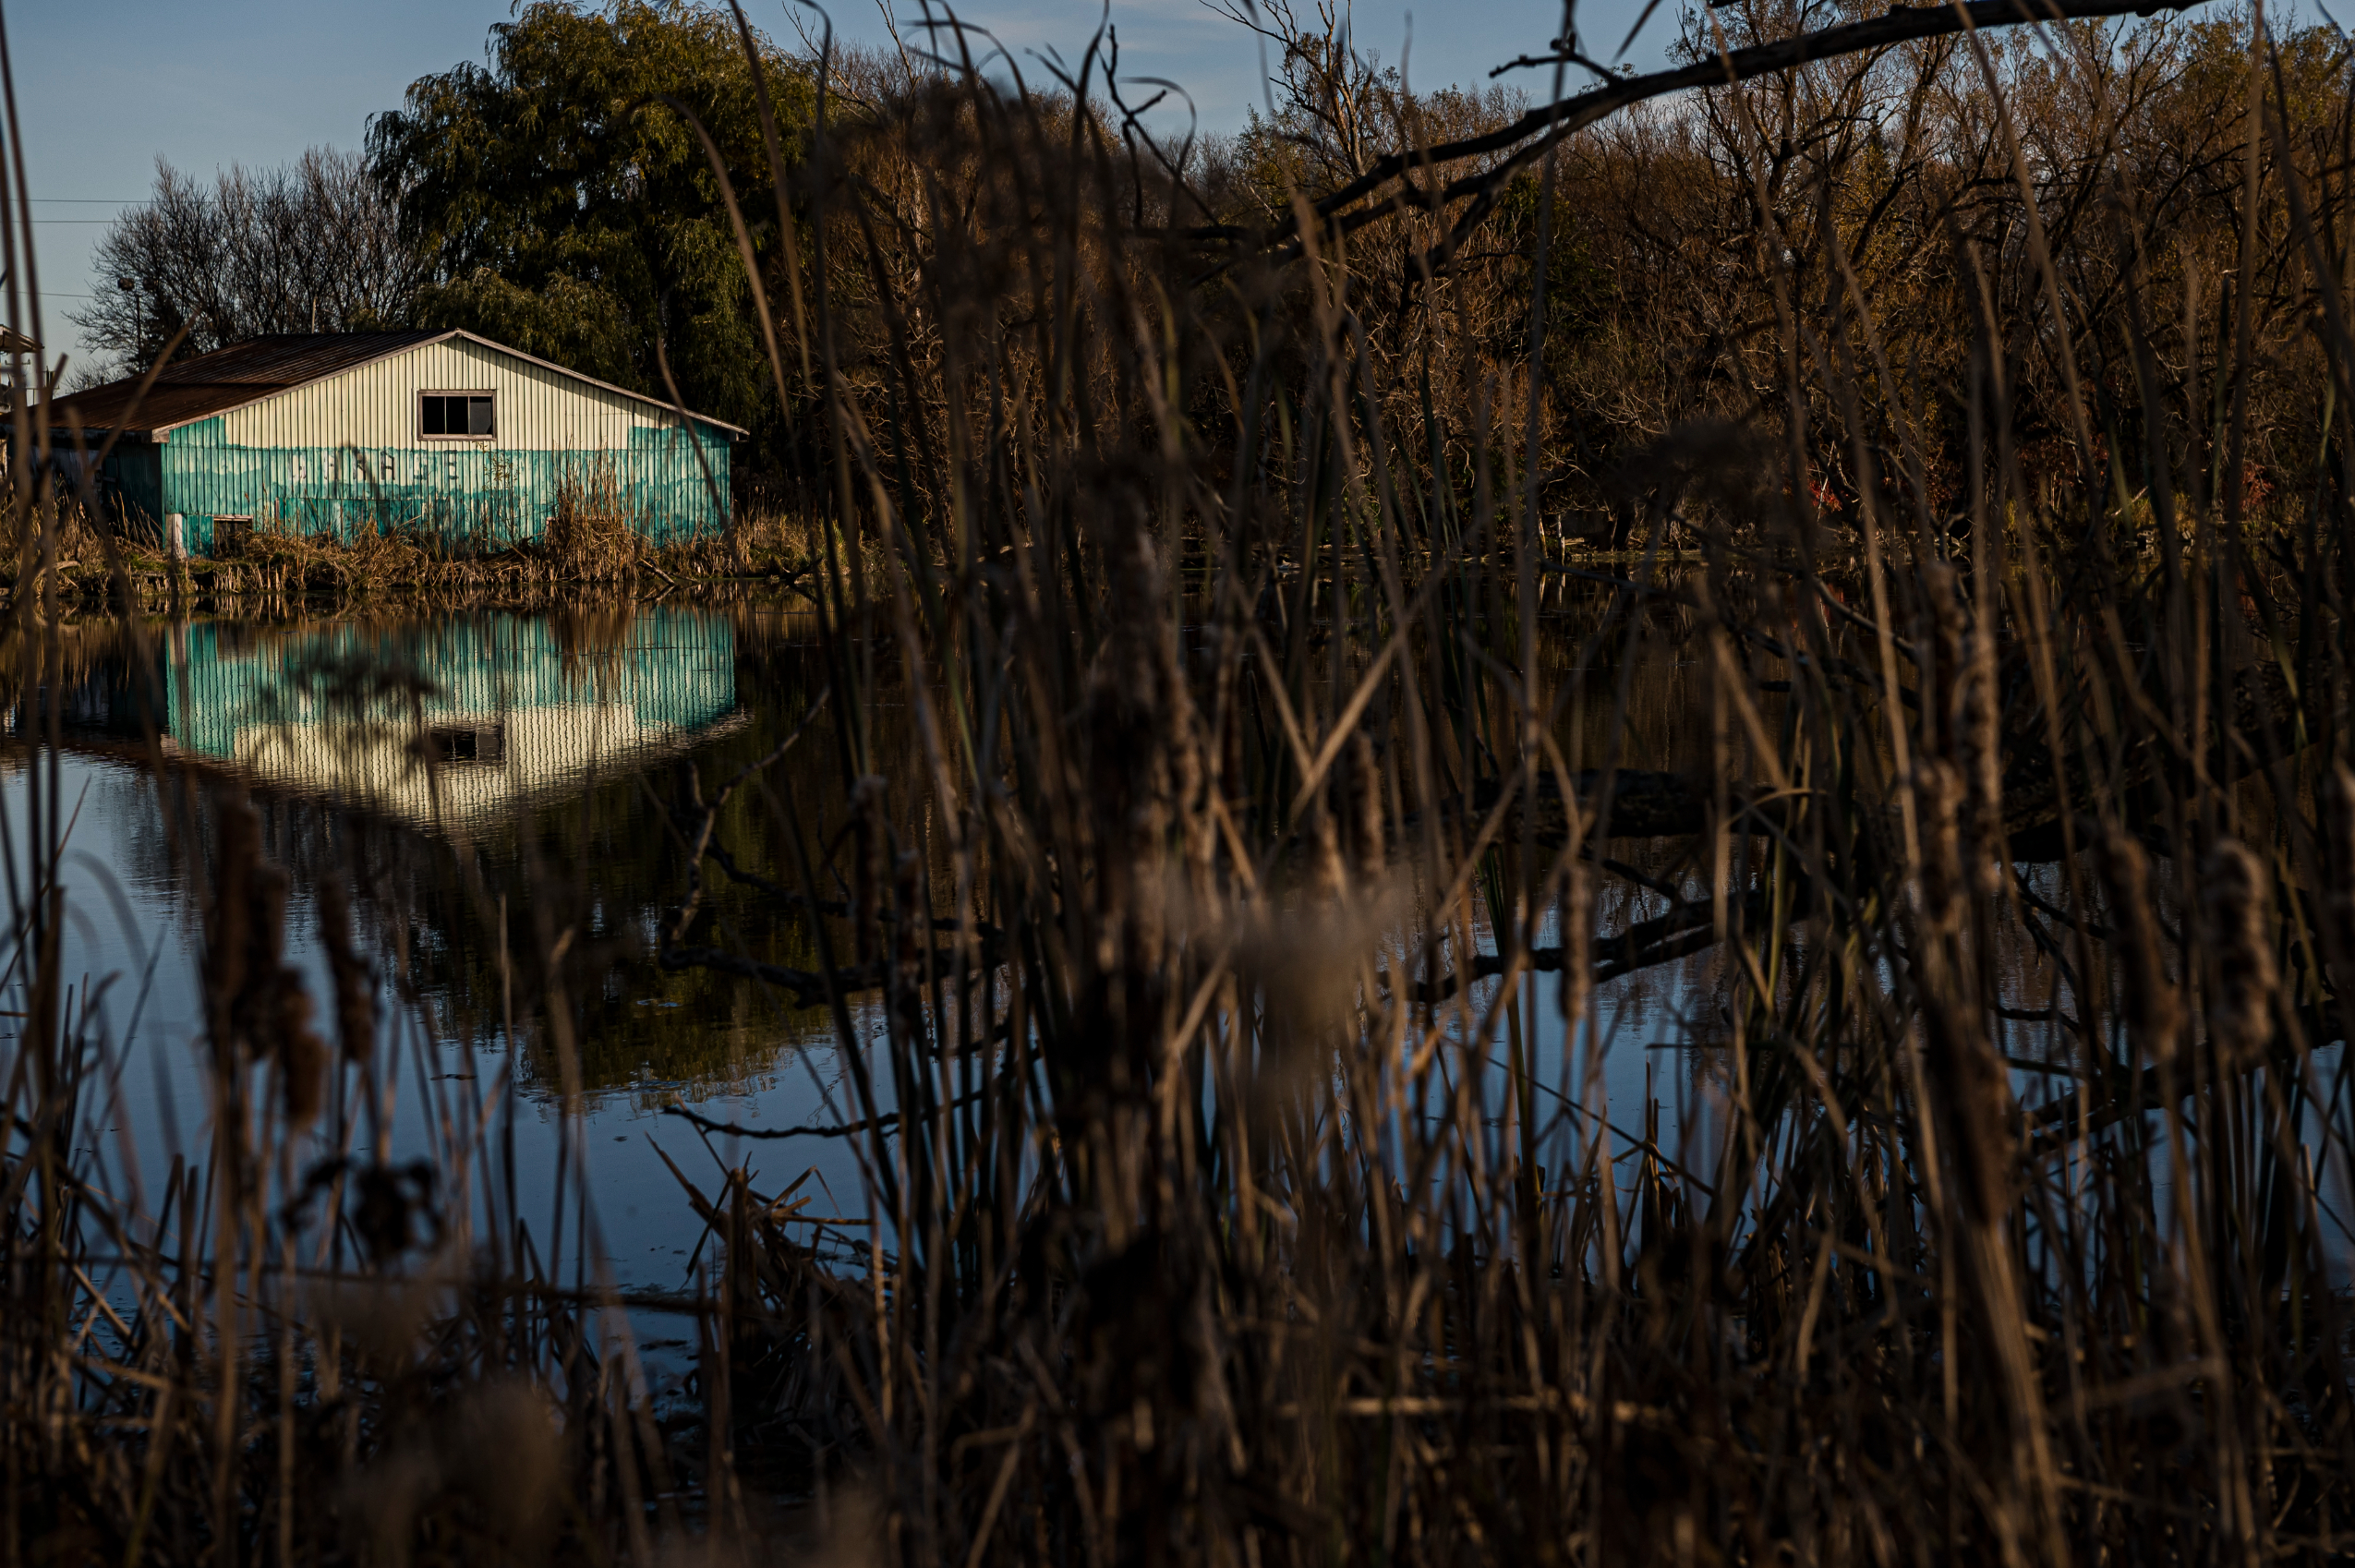 A building on the Holland River seen through reeds